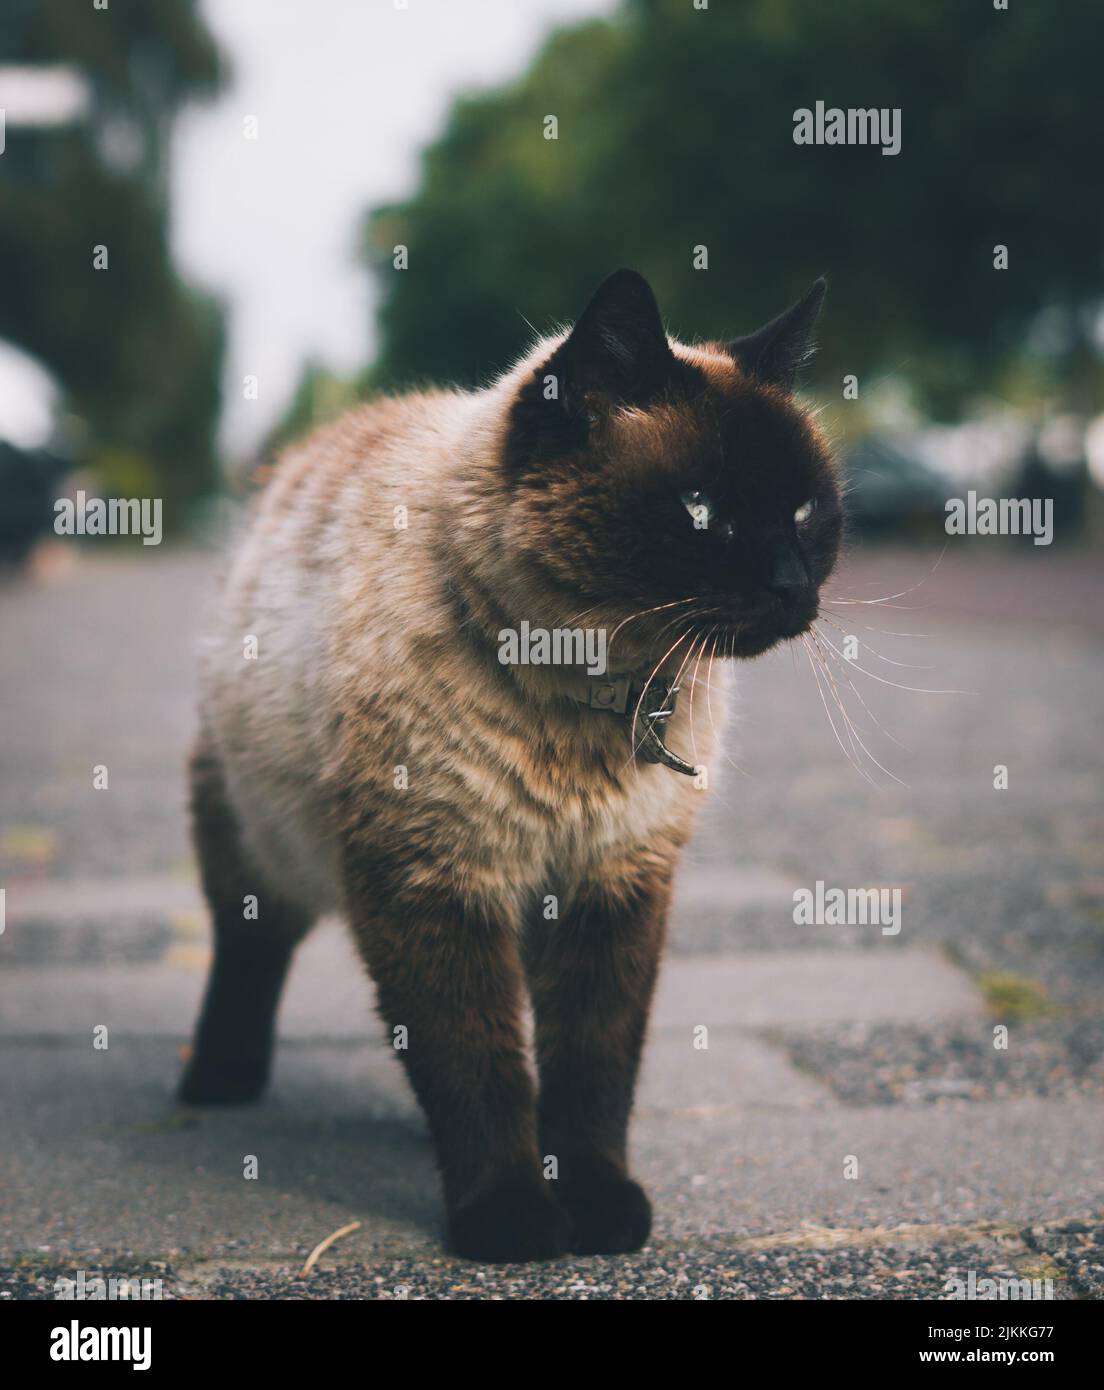 A closeup shot of a lovely white and black cat on the street with a blurry background of trees and sky Stock Photo